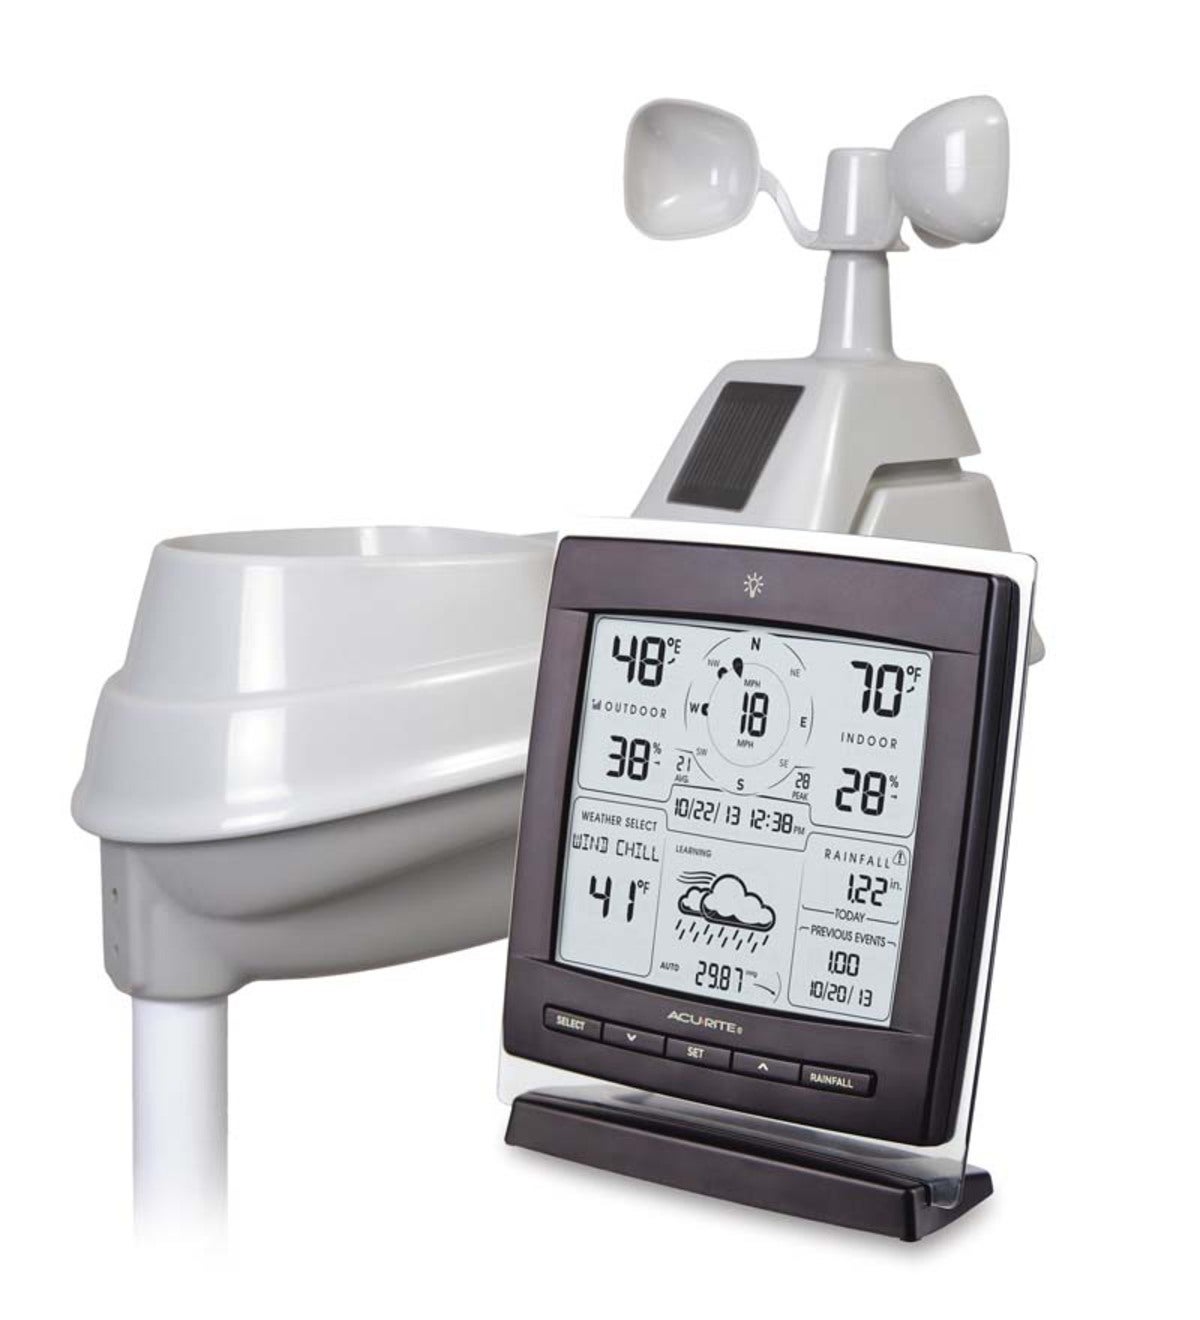 Digital Weather Station with 5-in-1 Wireless Sensor by AcuRite